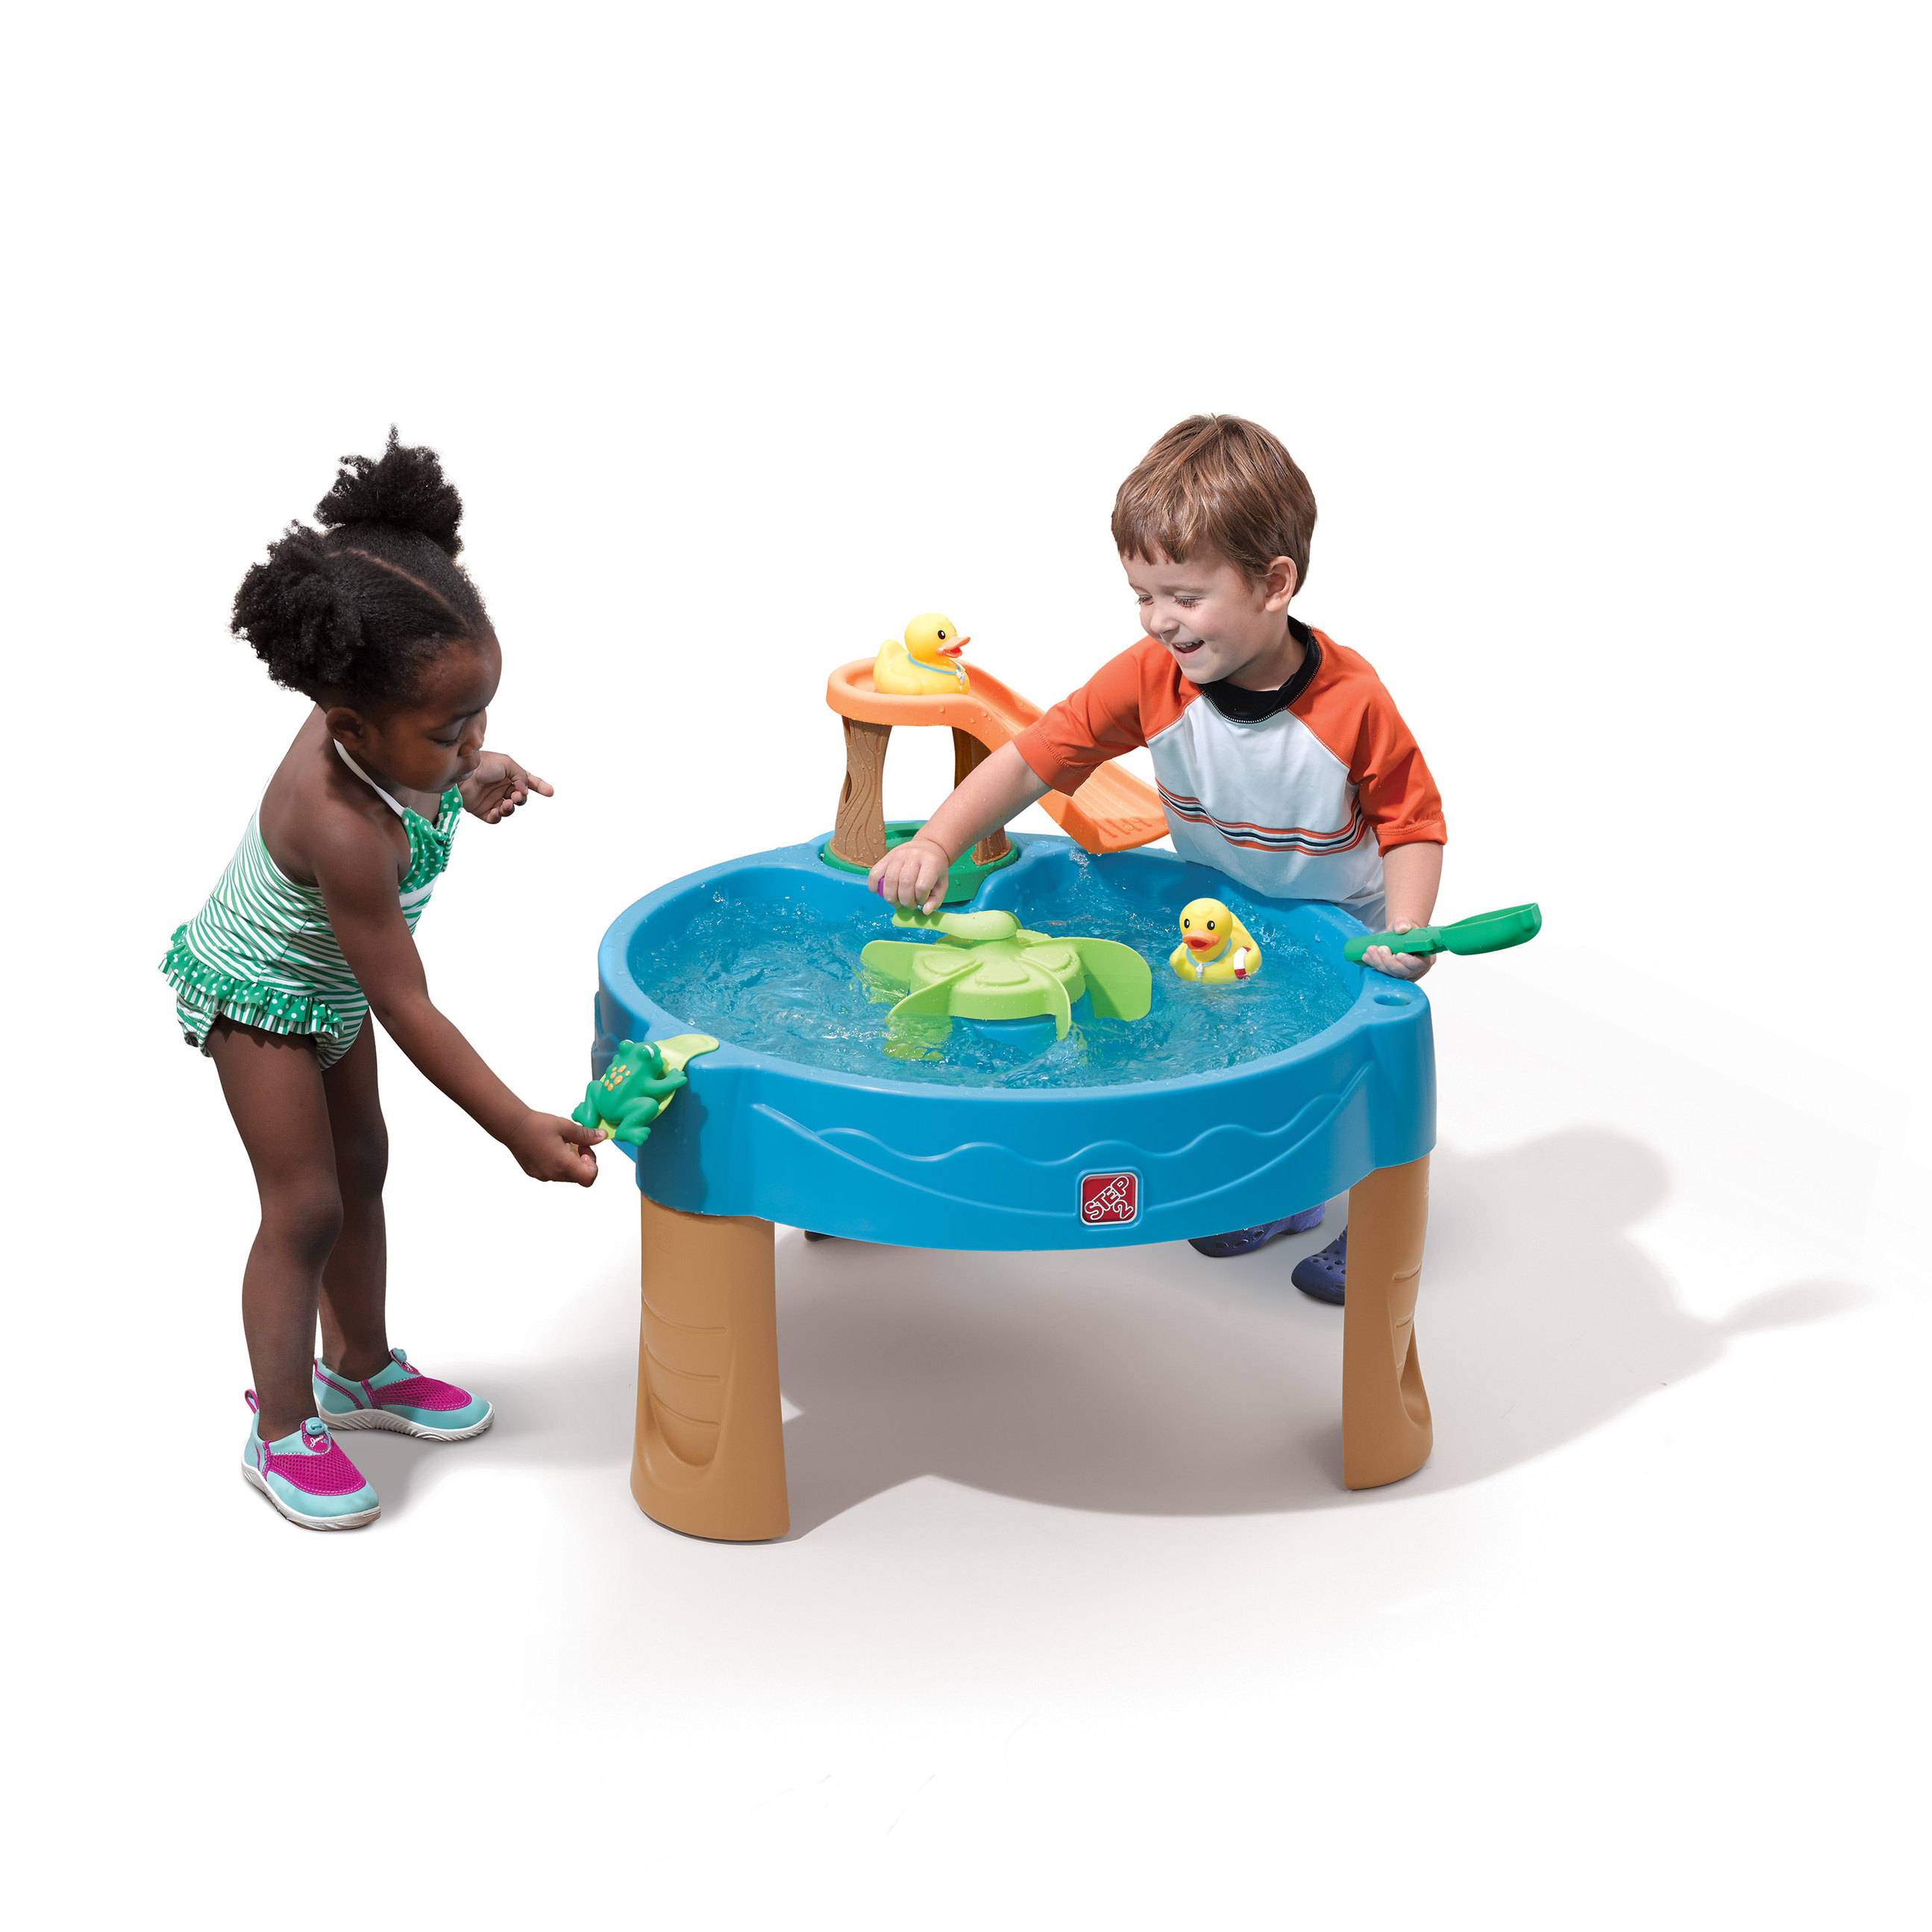 Step2 Duck Pond Blue Plastic Water Table for Toddler with 6-piece Playset - image 2 of 10